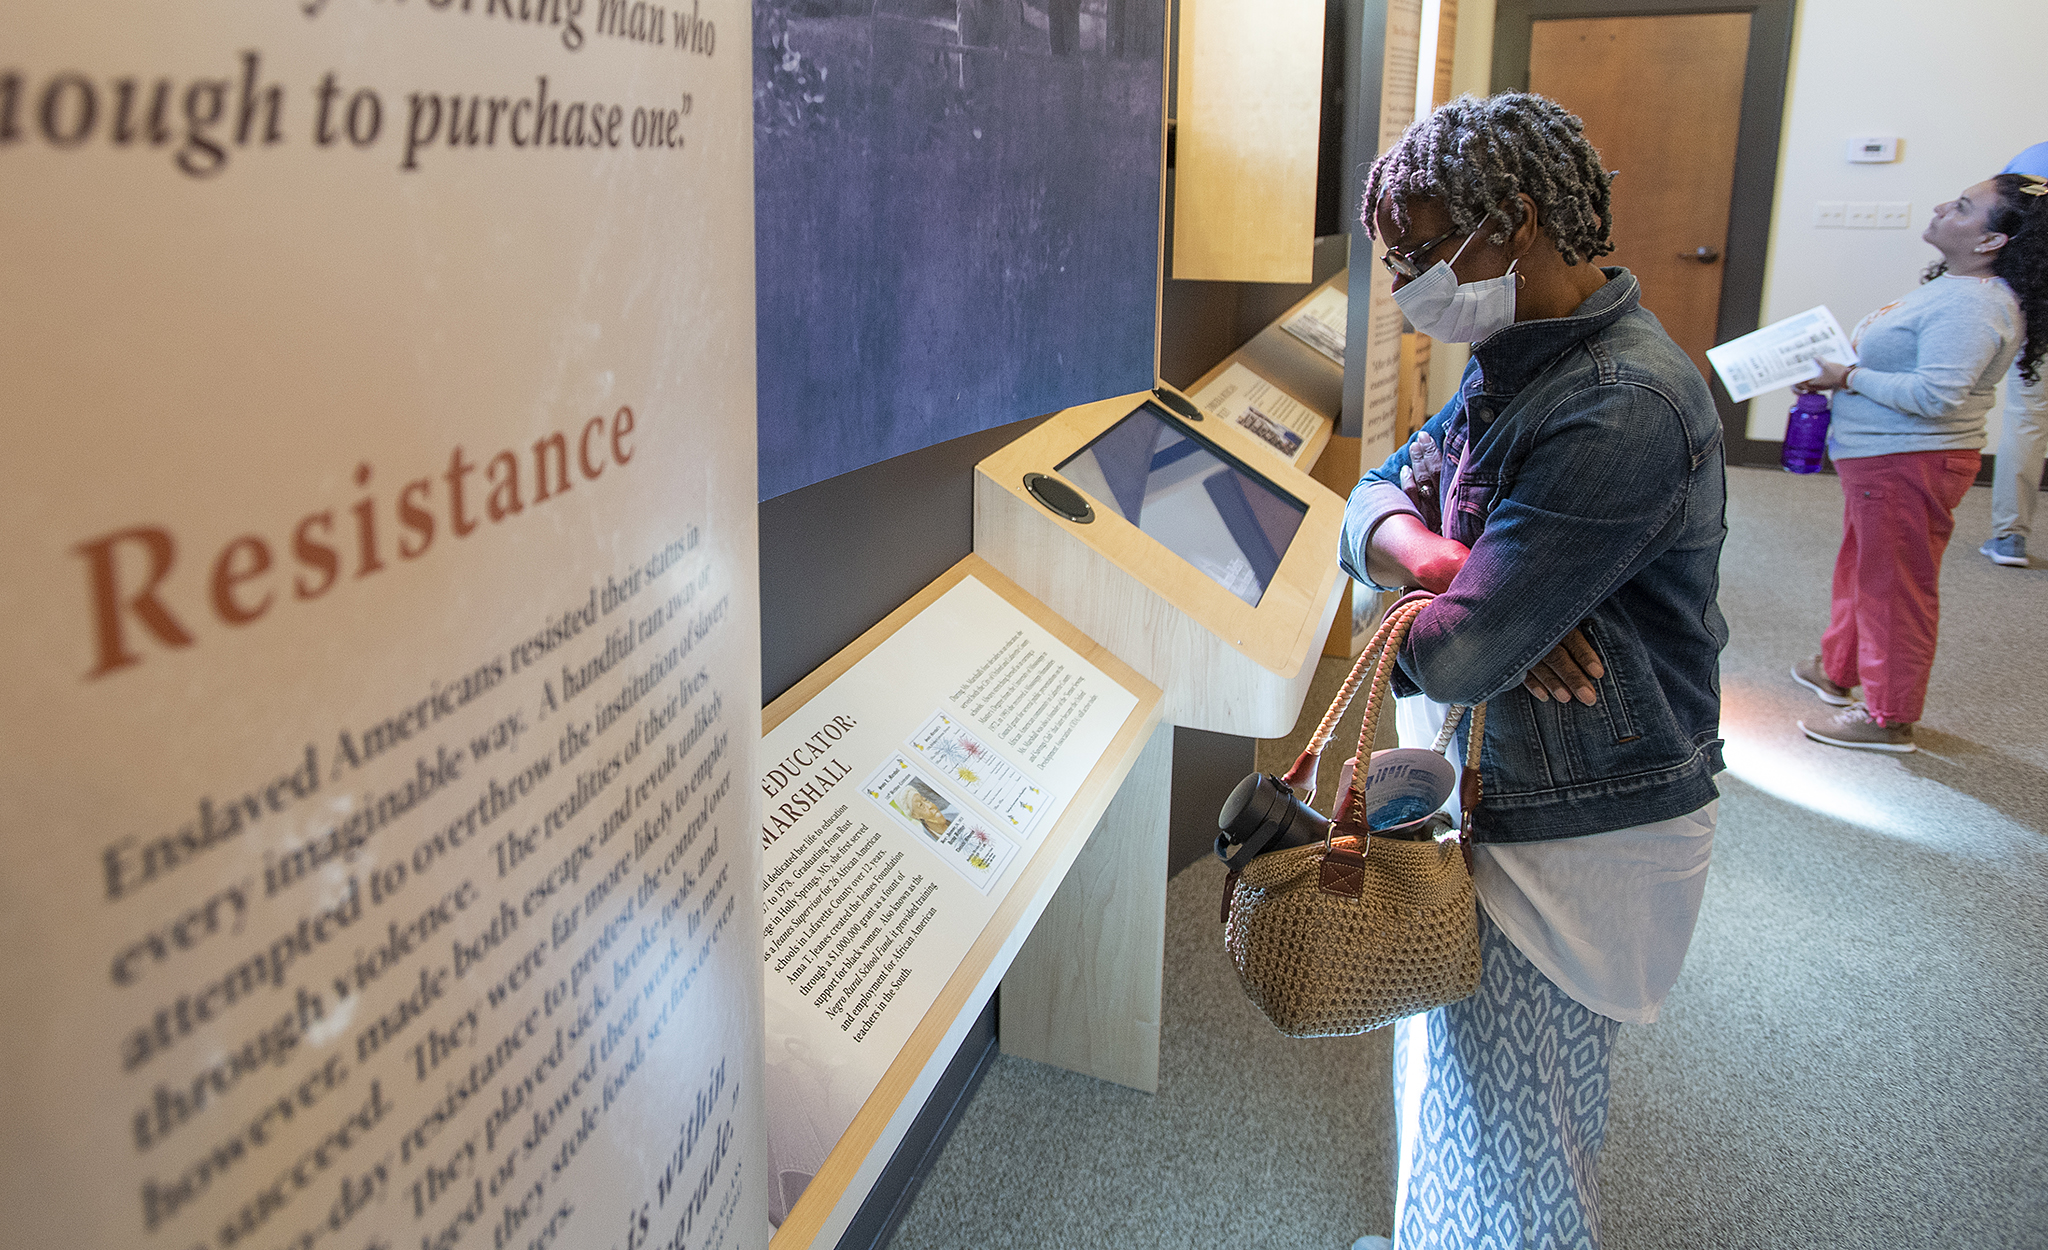 Margaret Gipson, who attended the Civil Rights in Oxford Town bus tour, looks at exhibits in the Burns-Belfry Museum and Multicultural Center. Gipson’s grandfather, Roger Thompson, was a custodian when James Meredith integrated the university in 1962. Photo by Thomas Graning/Ole Miss Digital Imaging Services